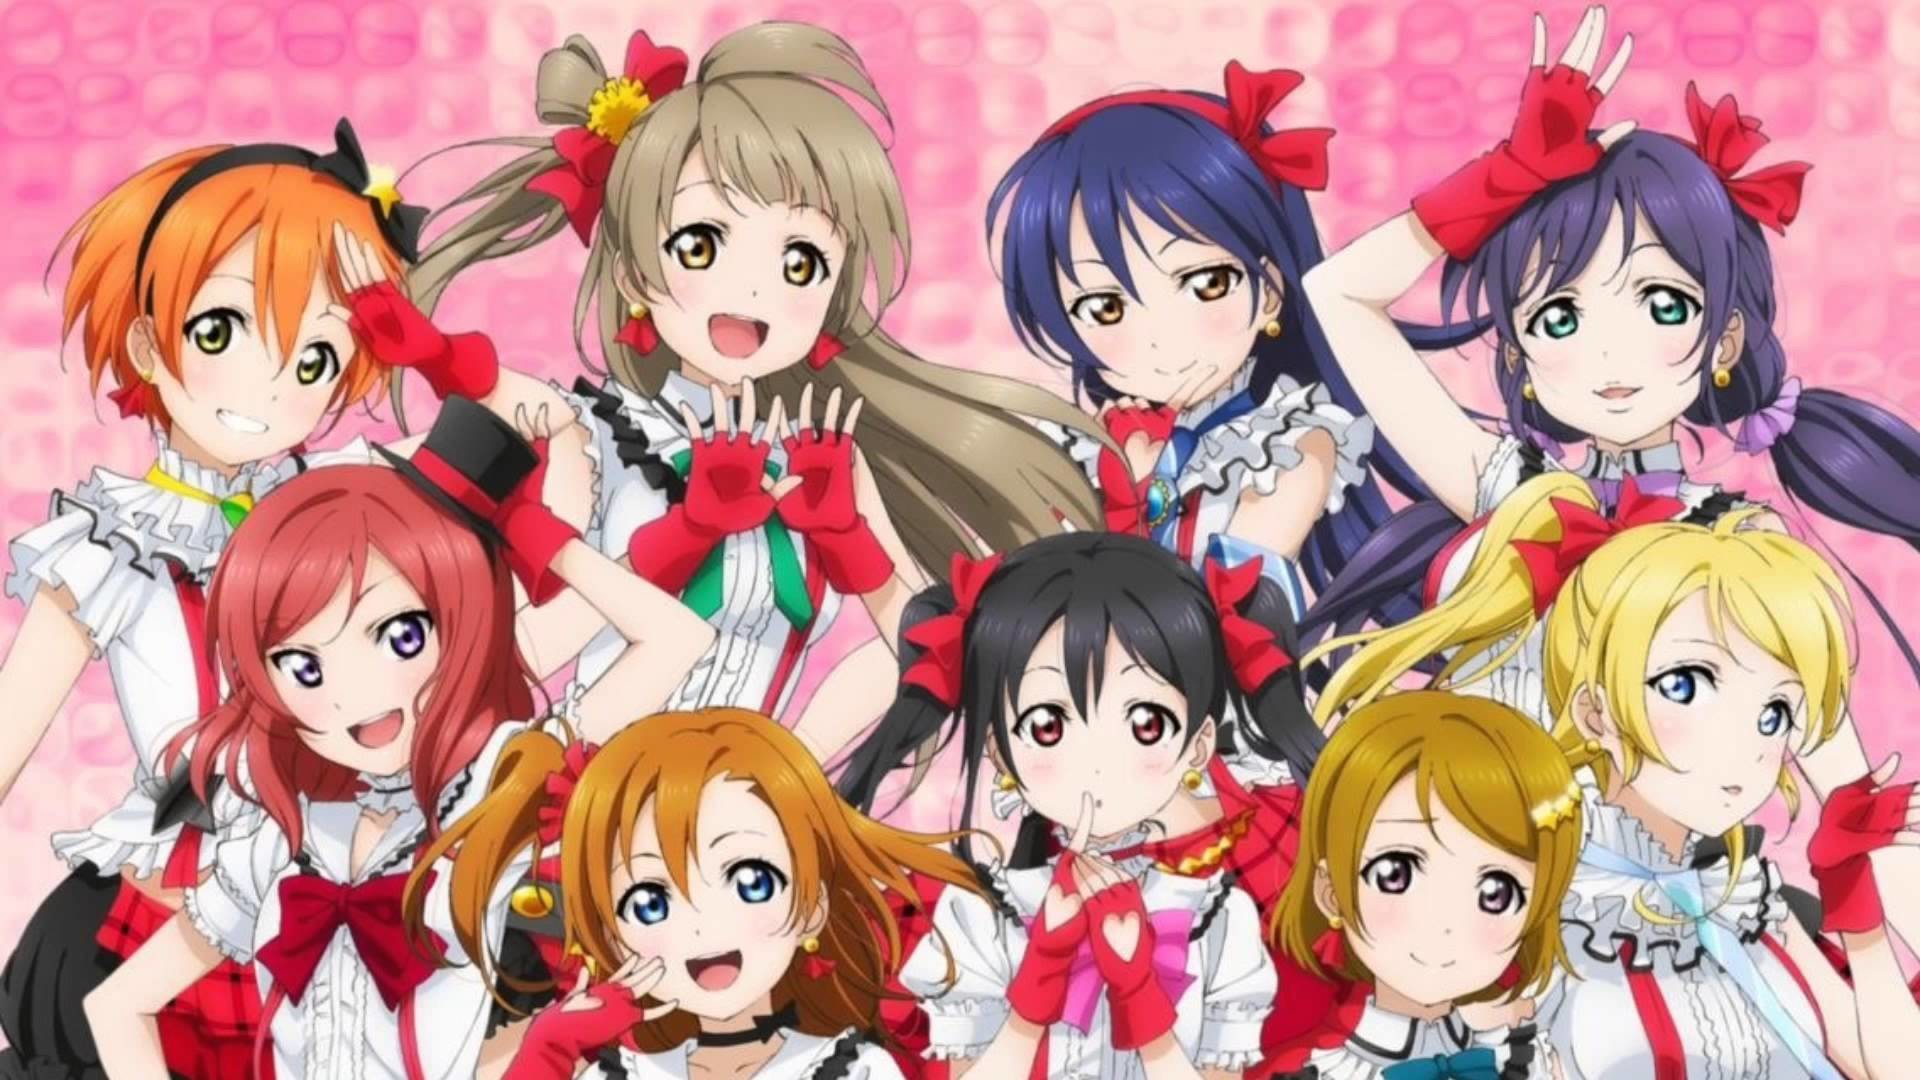 1920x1080 HD Wallpaper and background photos of Love Live: School Idol Project!